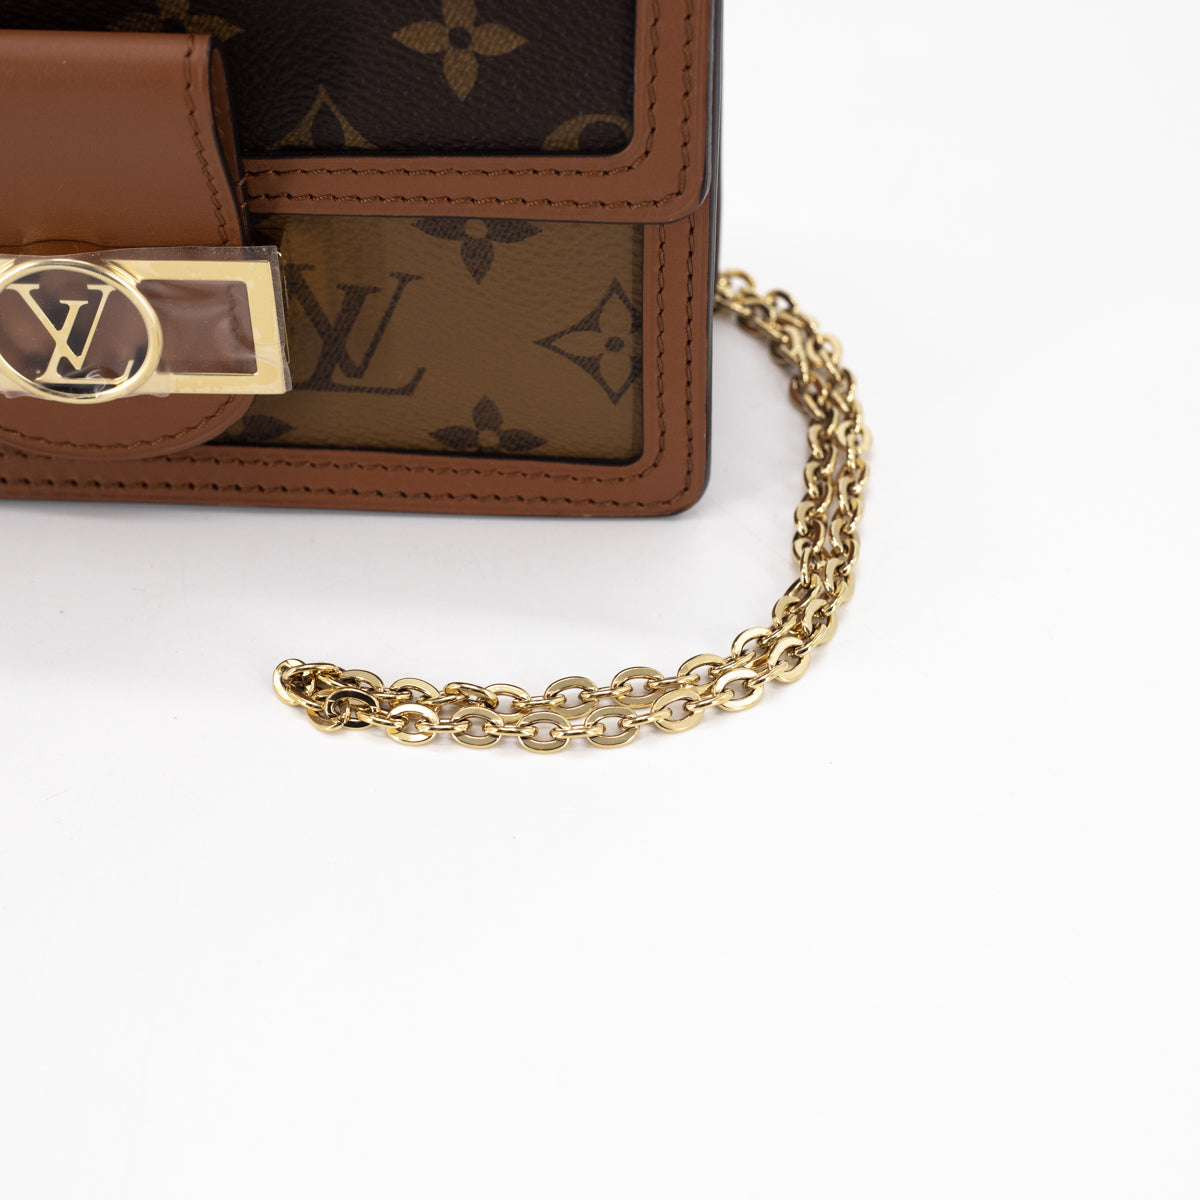 Louis Vuitton New Dauphine Wallet Chain and more 😍 